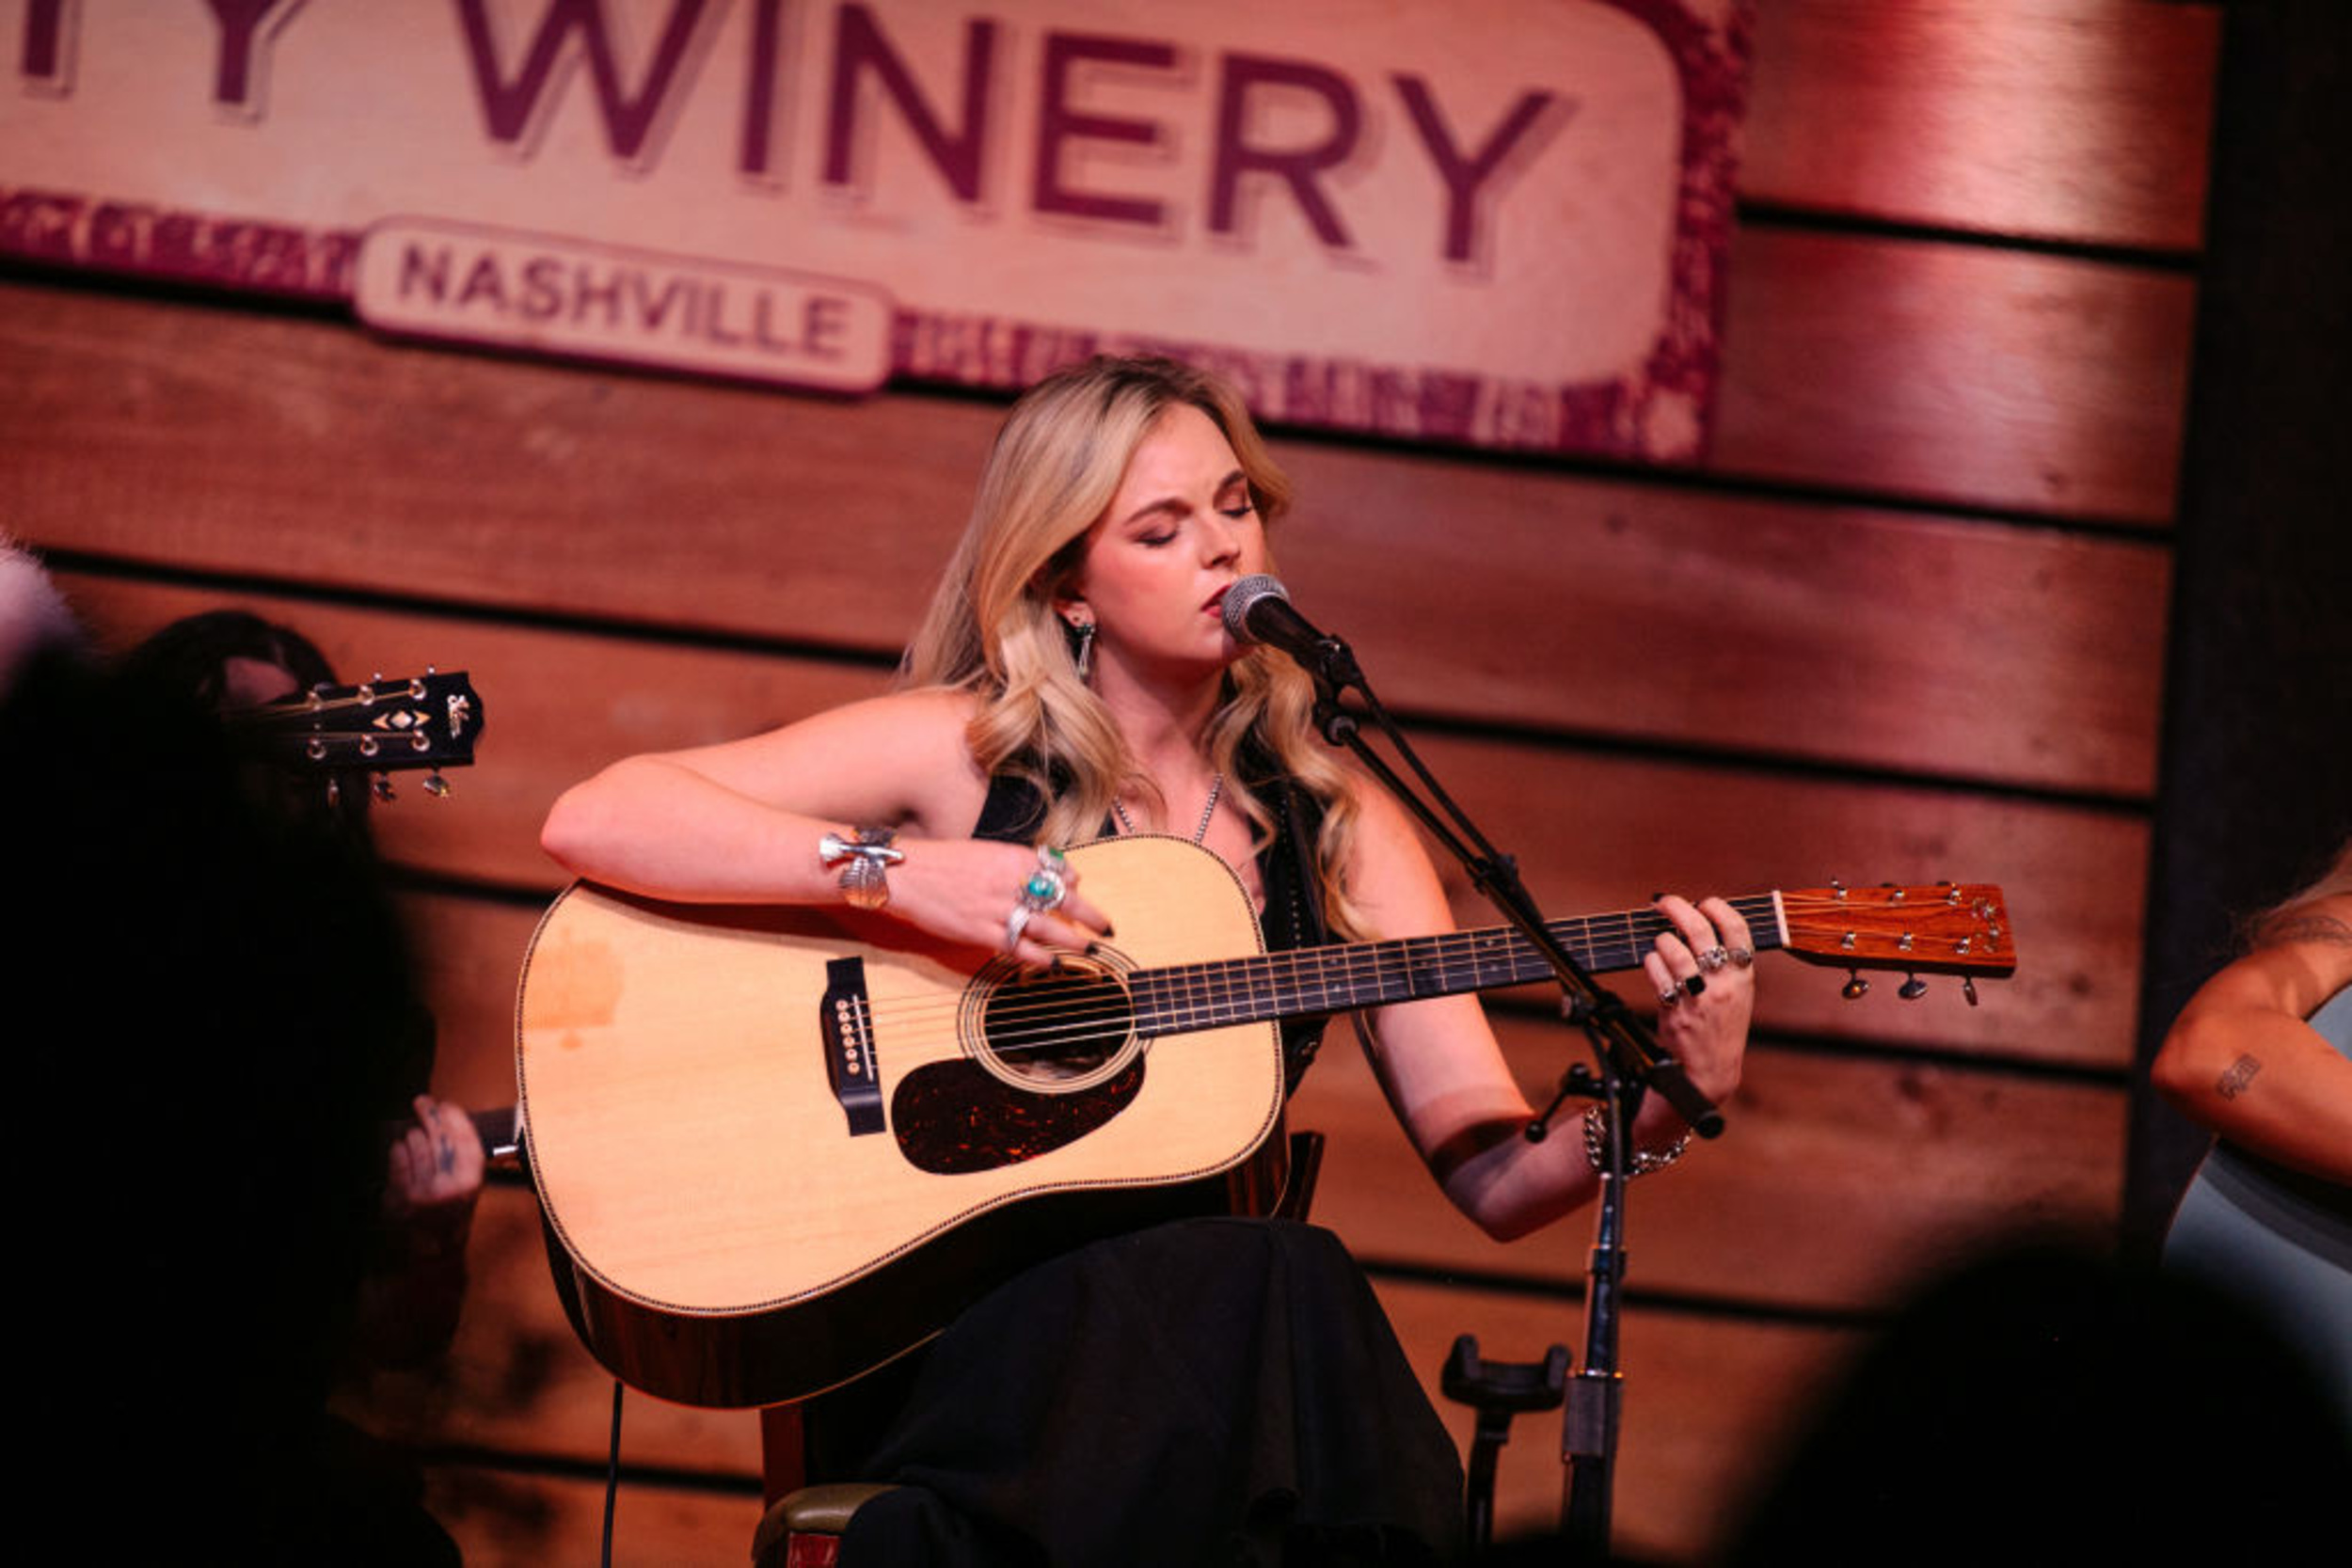 <p>After trying her hand at acting, Karley Scott Collins moved to Nashville in 2019 after she scored a publishing deal. In the years following, she's been writing and honing her sound, and the results are impressive. Listen to "Marlboro Reds" or "Heavy Metal" for an idea of her rock-inflected vibe. </p><p>You may also like: <a href='https://www.yardbarker.com/entertainment/articles/vocalists_who_might_be_the_best_musician_in_their_band_022824/s1__39703114'>Vocalists who might be the best musician in their band</a></p>